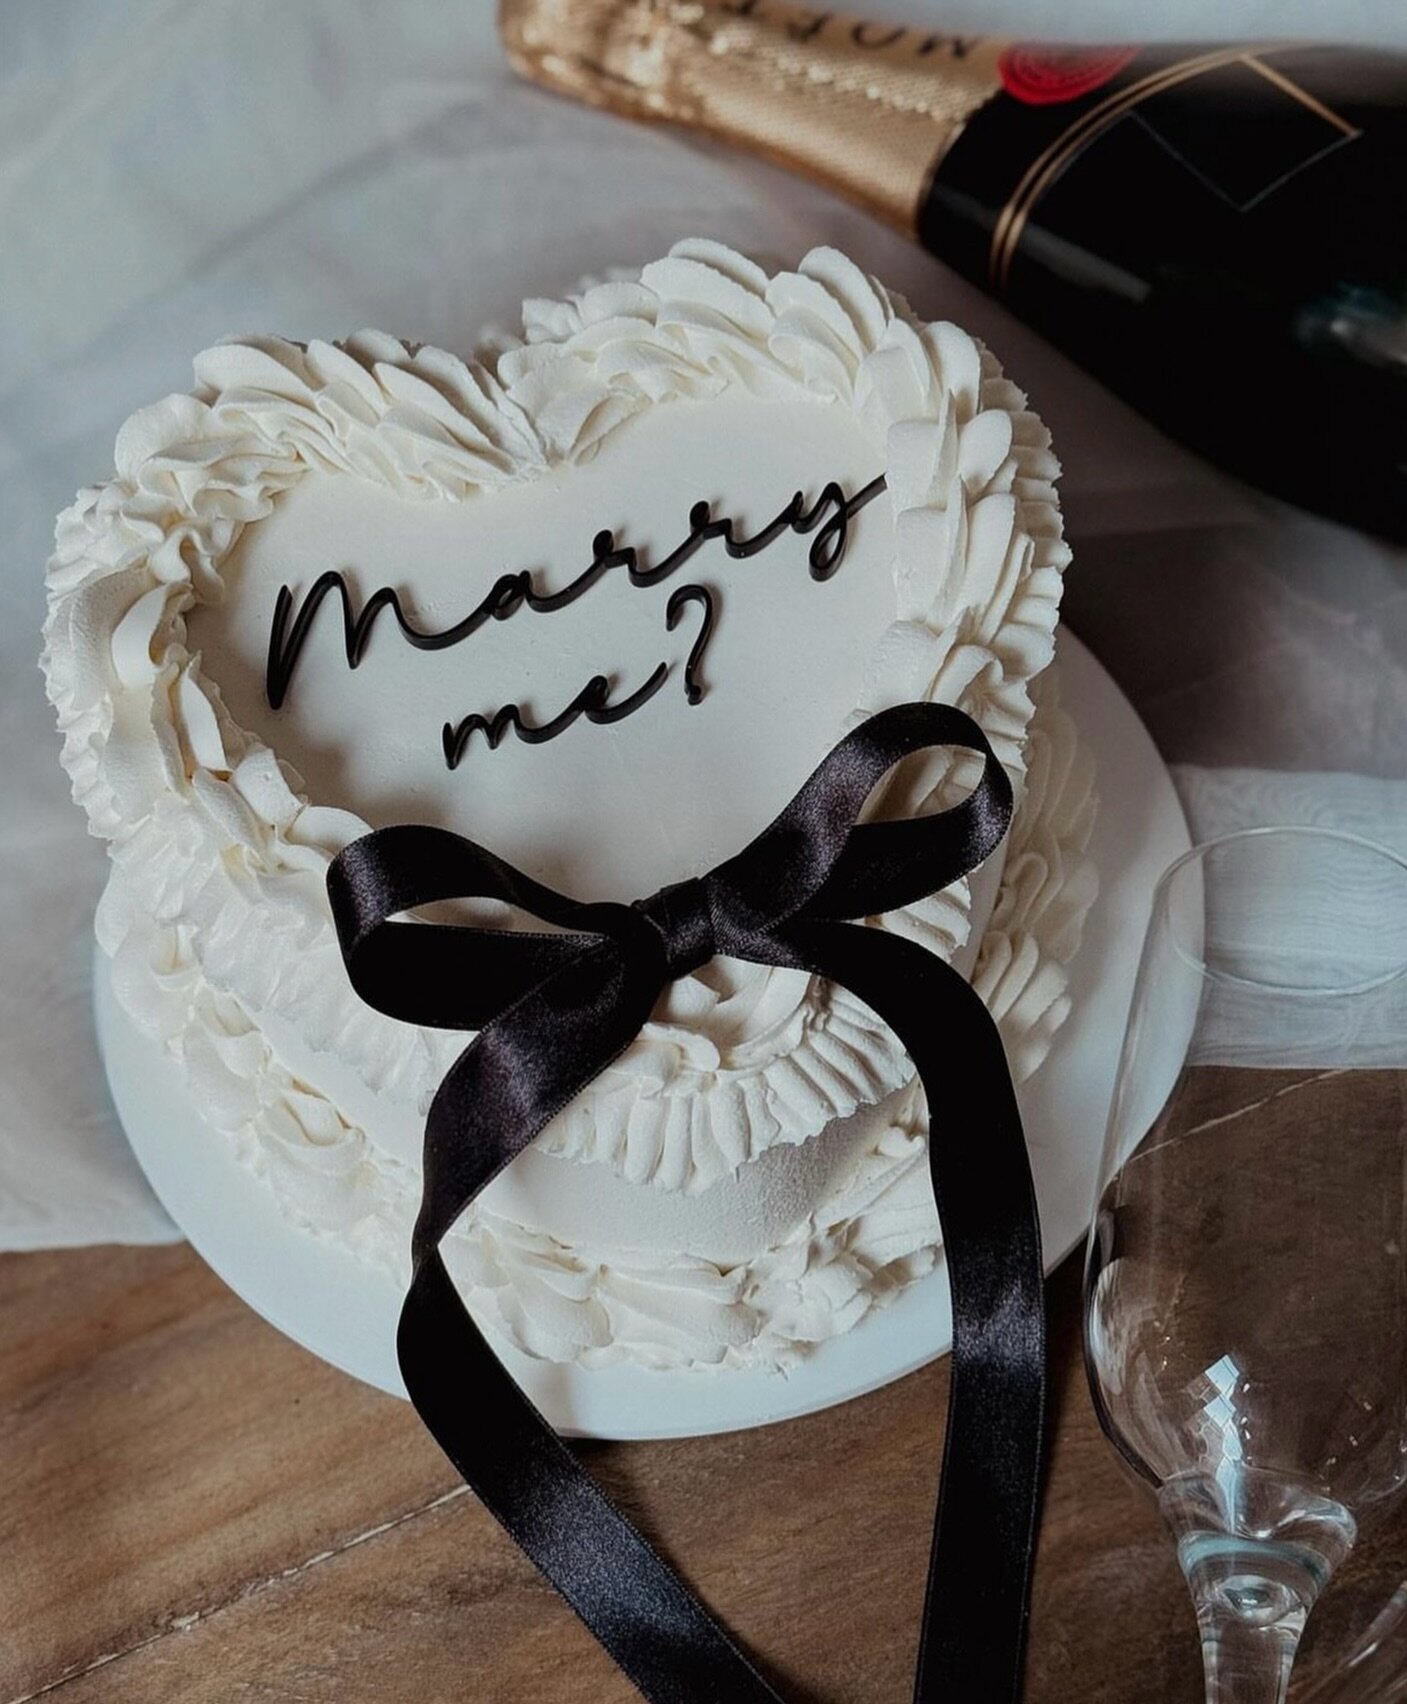 spring-forward monday calls for cake. &hearts;

we have appointments this week! secure your spot at your local a&amp;b&eacute; location online now. 🥂

&bull; @aandbe_austin 
&bull; @aandbe__boise 
&bull; @aandbe_dallas 
&bull; @aandbe_denver 
&bull;